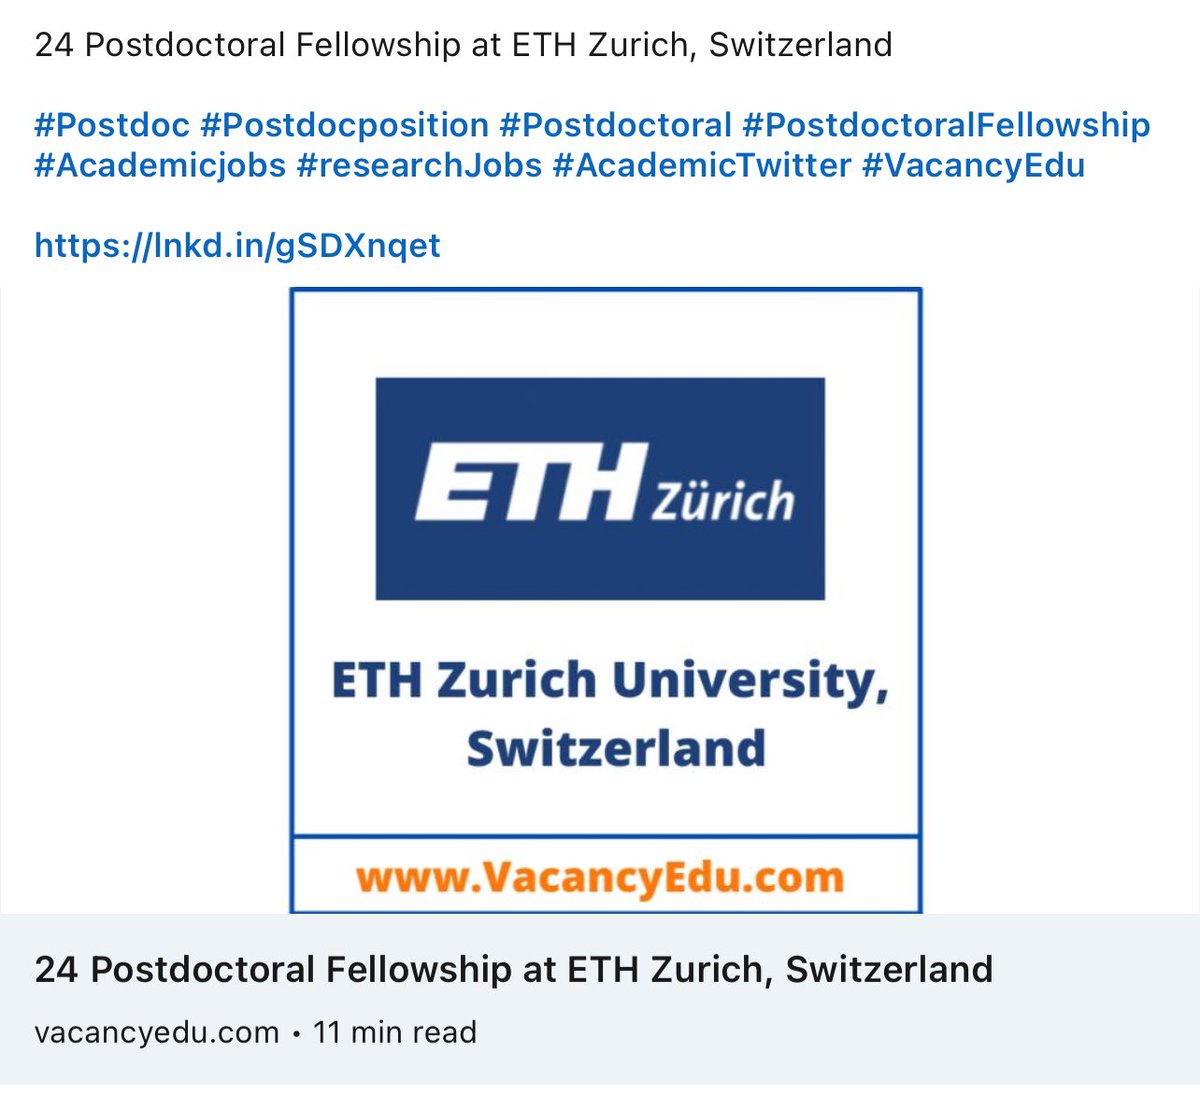 24 Postdoctoral Fellowships at ETH Zurich, Switzerland
#Postdoc #Postdocposition #Postdoctoral #PostdoctoralFellowship #Academicjobs #researchJob